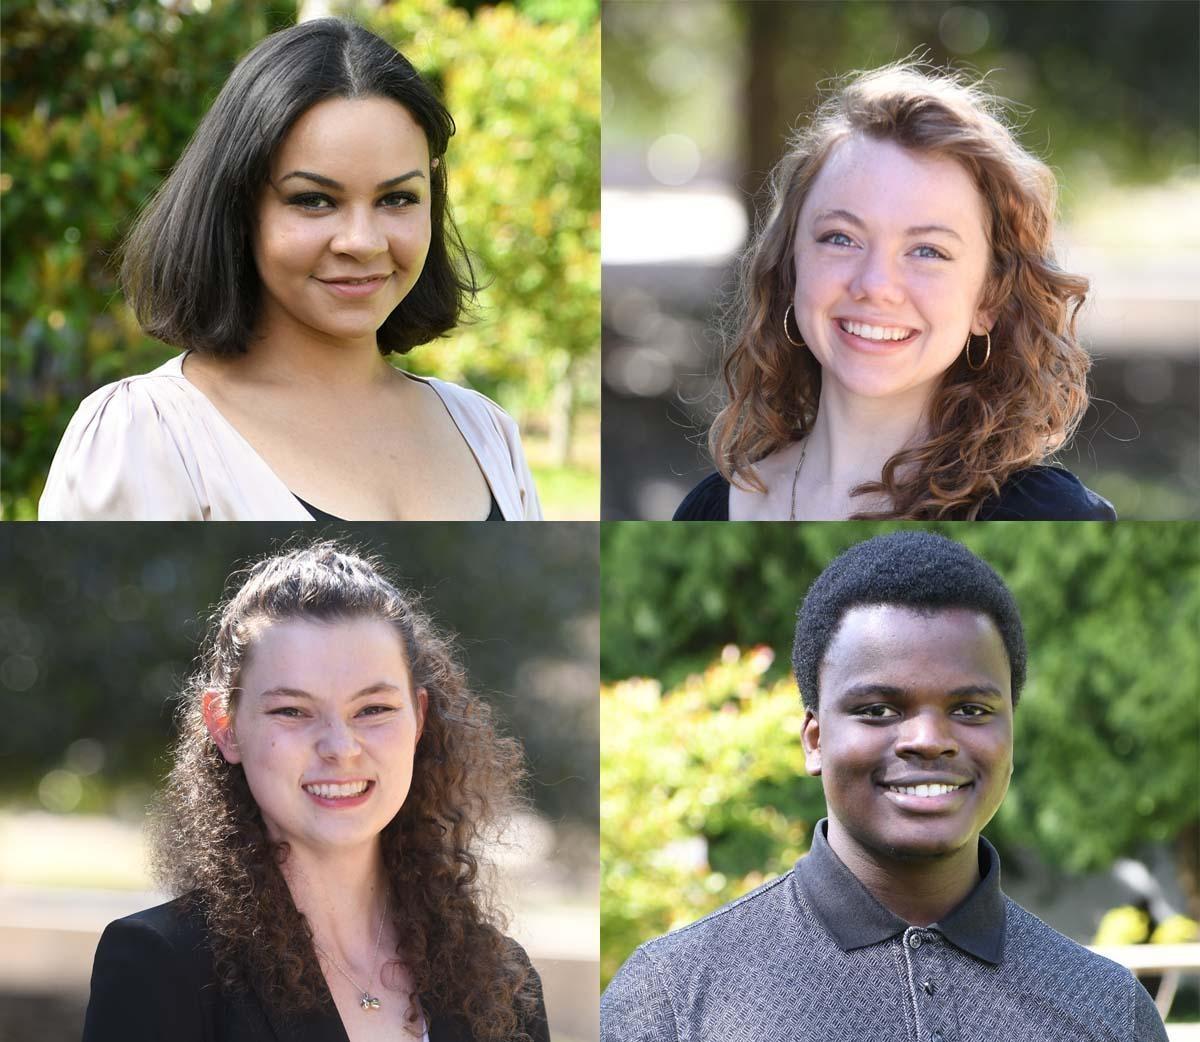 Clockwise from top left: Kathryn Stout, Julia Rohrer, Abiodun Adeoye and Jessica Pierce